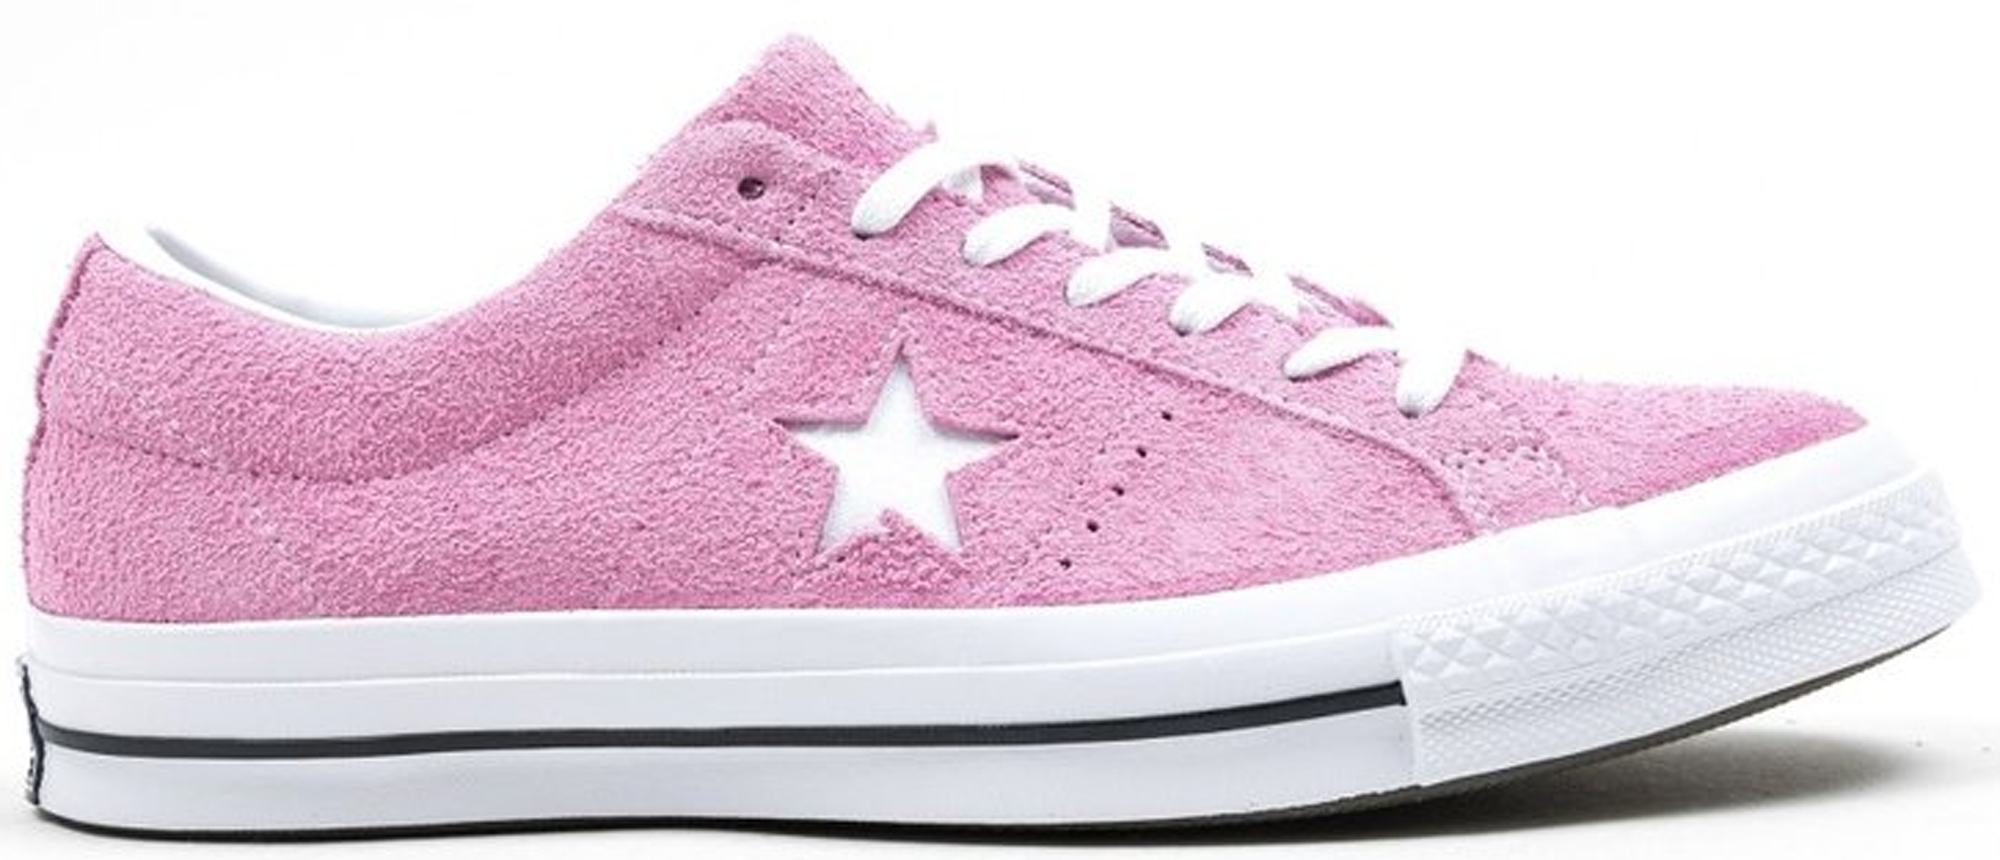 Converse One Star Ox Pink - 159492C